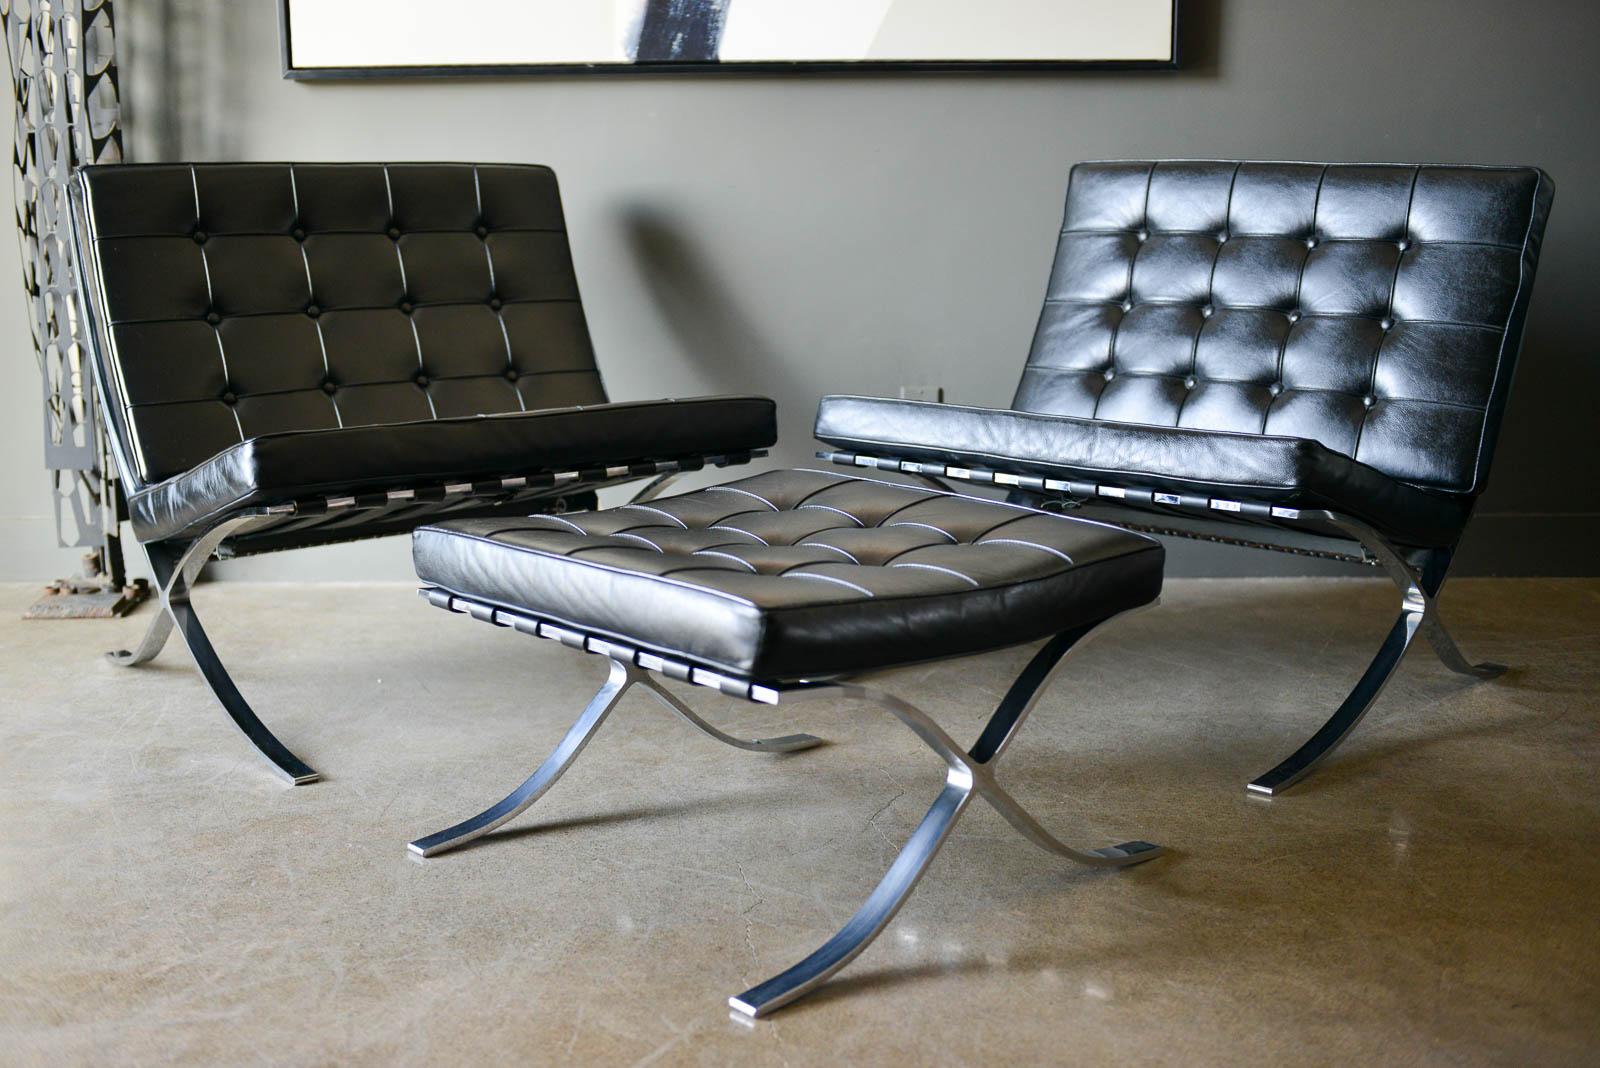 Pair of Barcelona chairs with ottoman. Original black leather cushions with very slight wear as shown otherwise excellent. Polished chrome frames. 

Chairs measure H 30.25